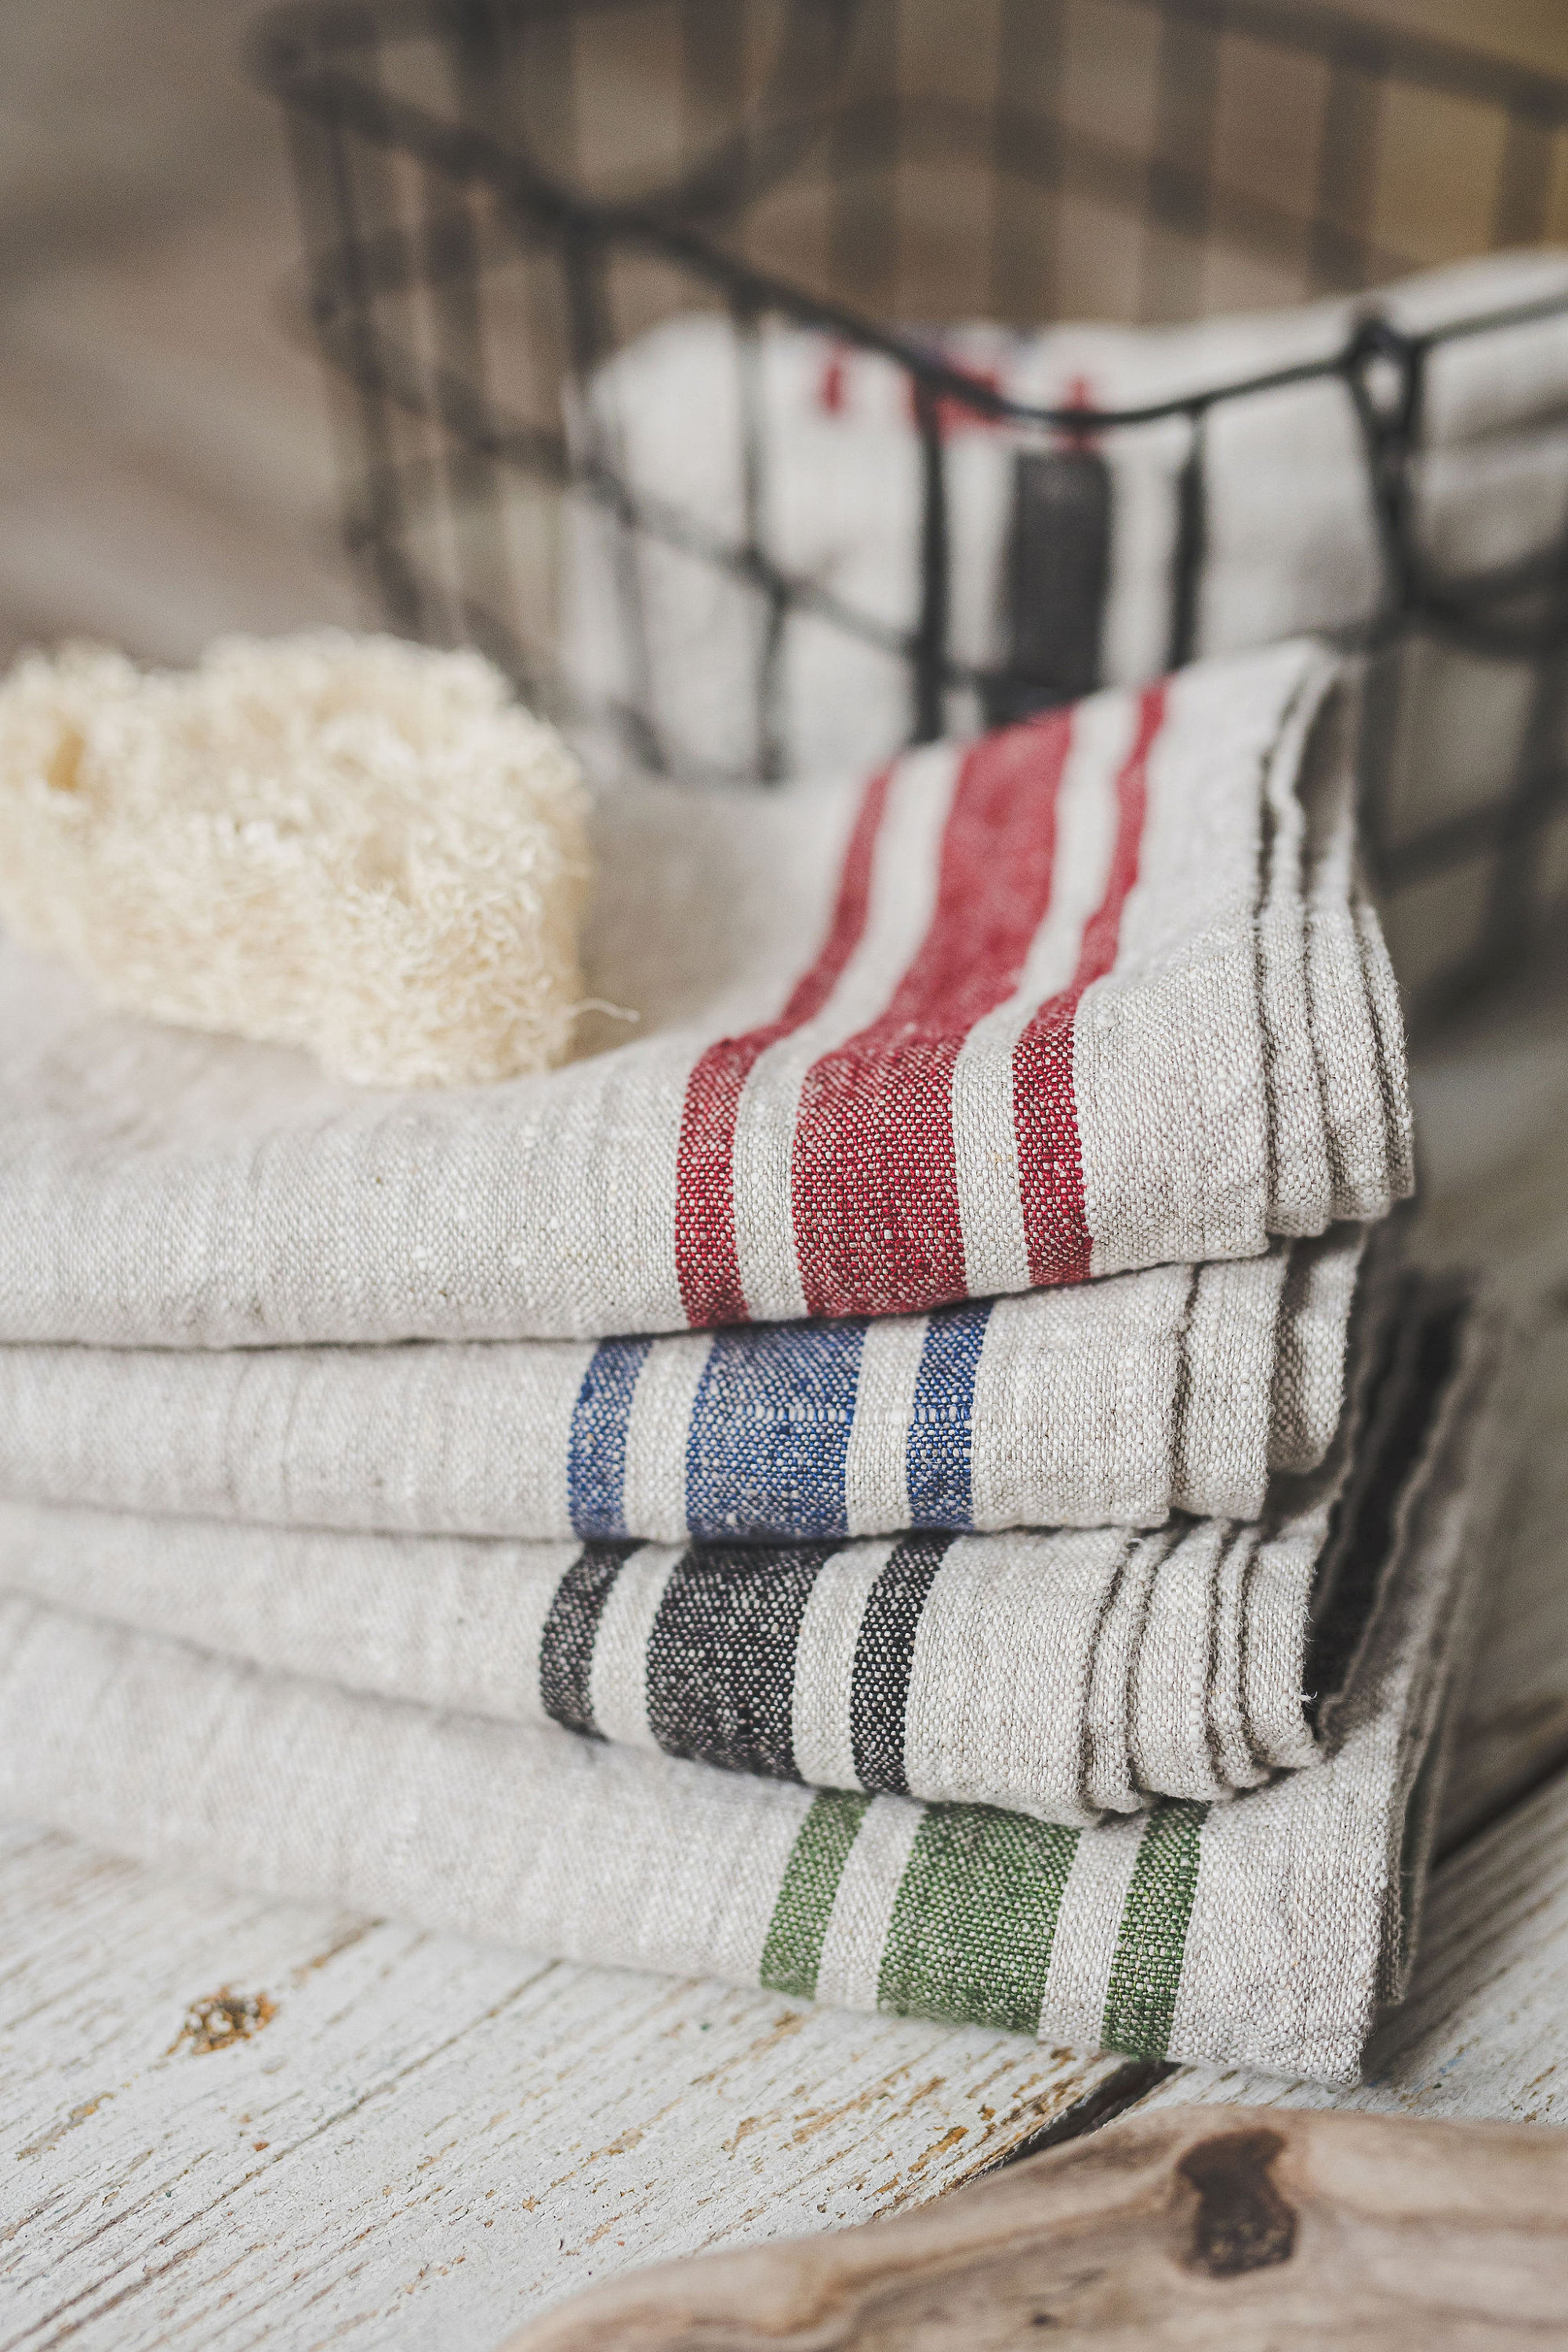 French Christmas Gifts  Handmade French Linen Kitchen Towels from Aimee's  French Market — Aimee's French Market